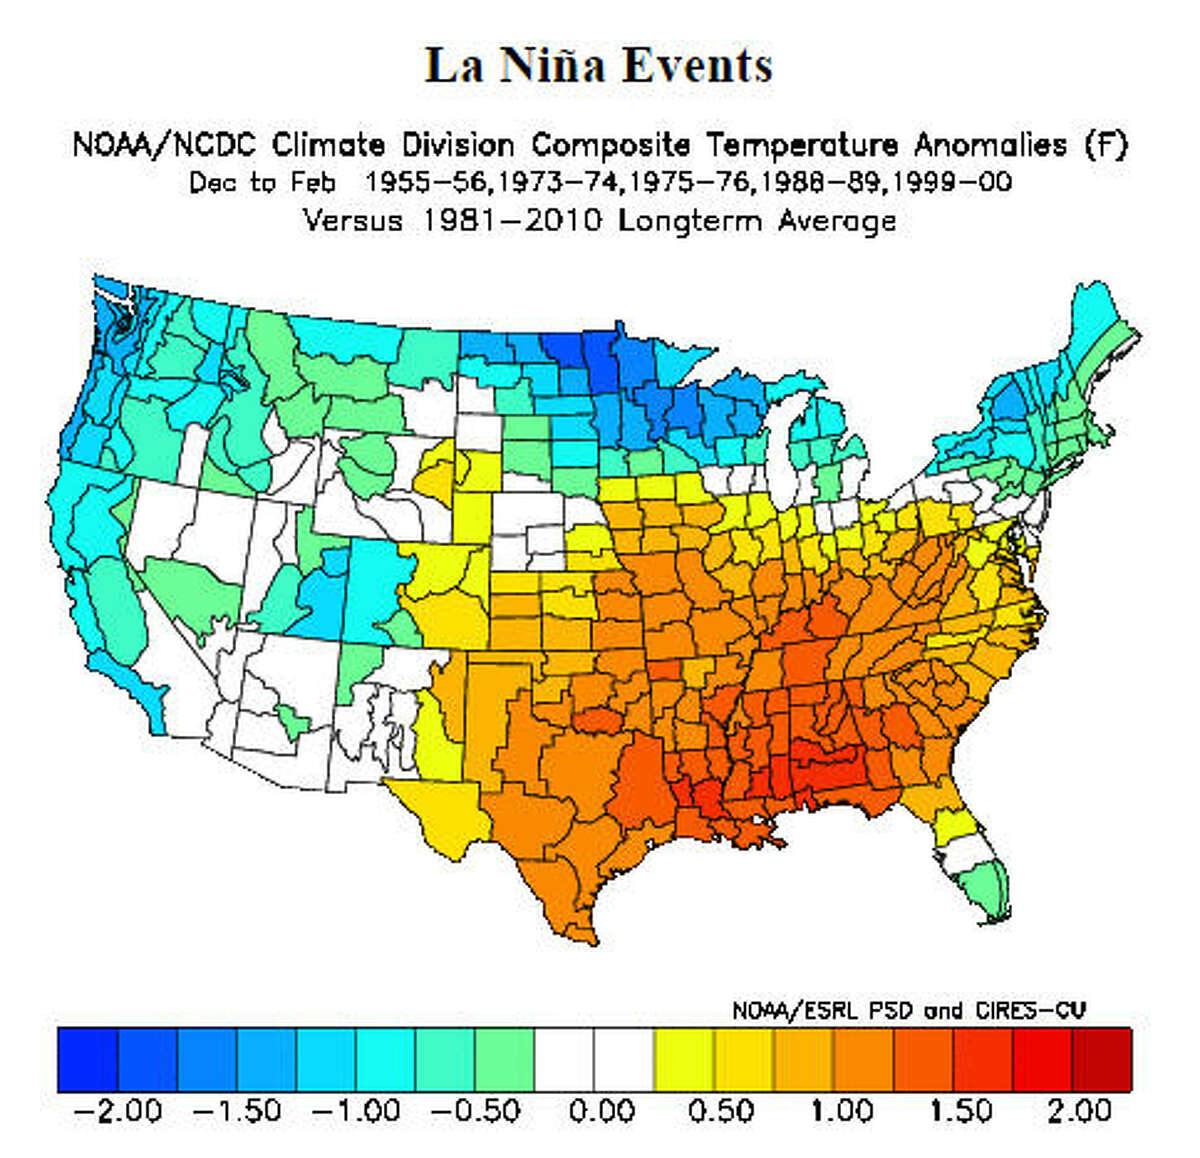 La Niña's impact on Texas could be bitterly cold winter followed by